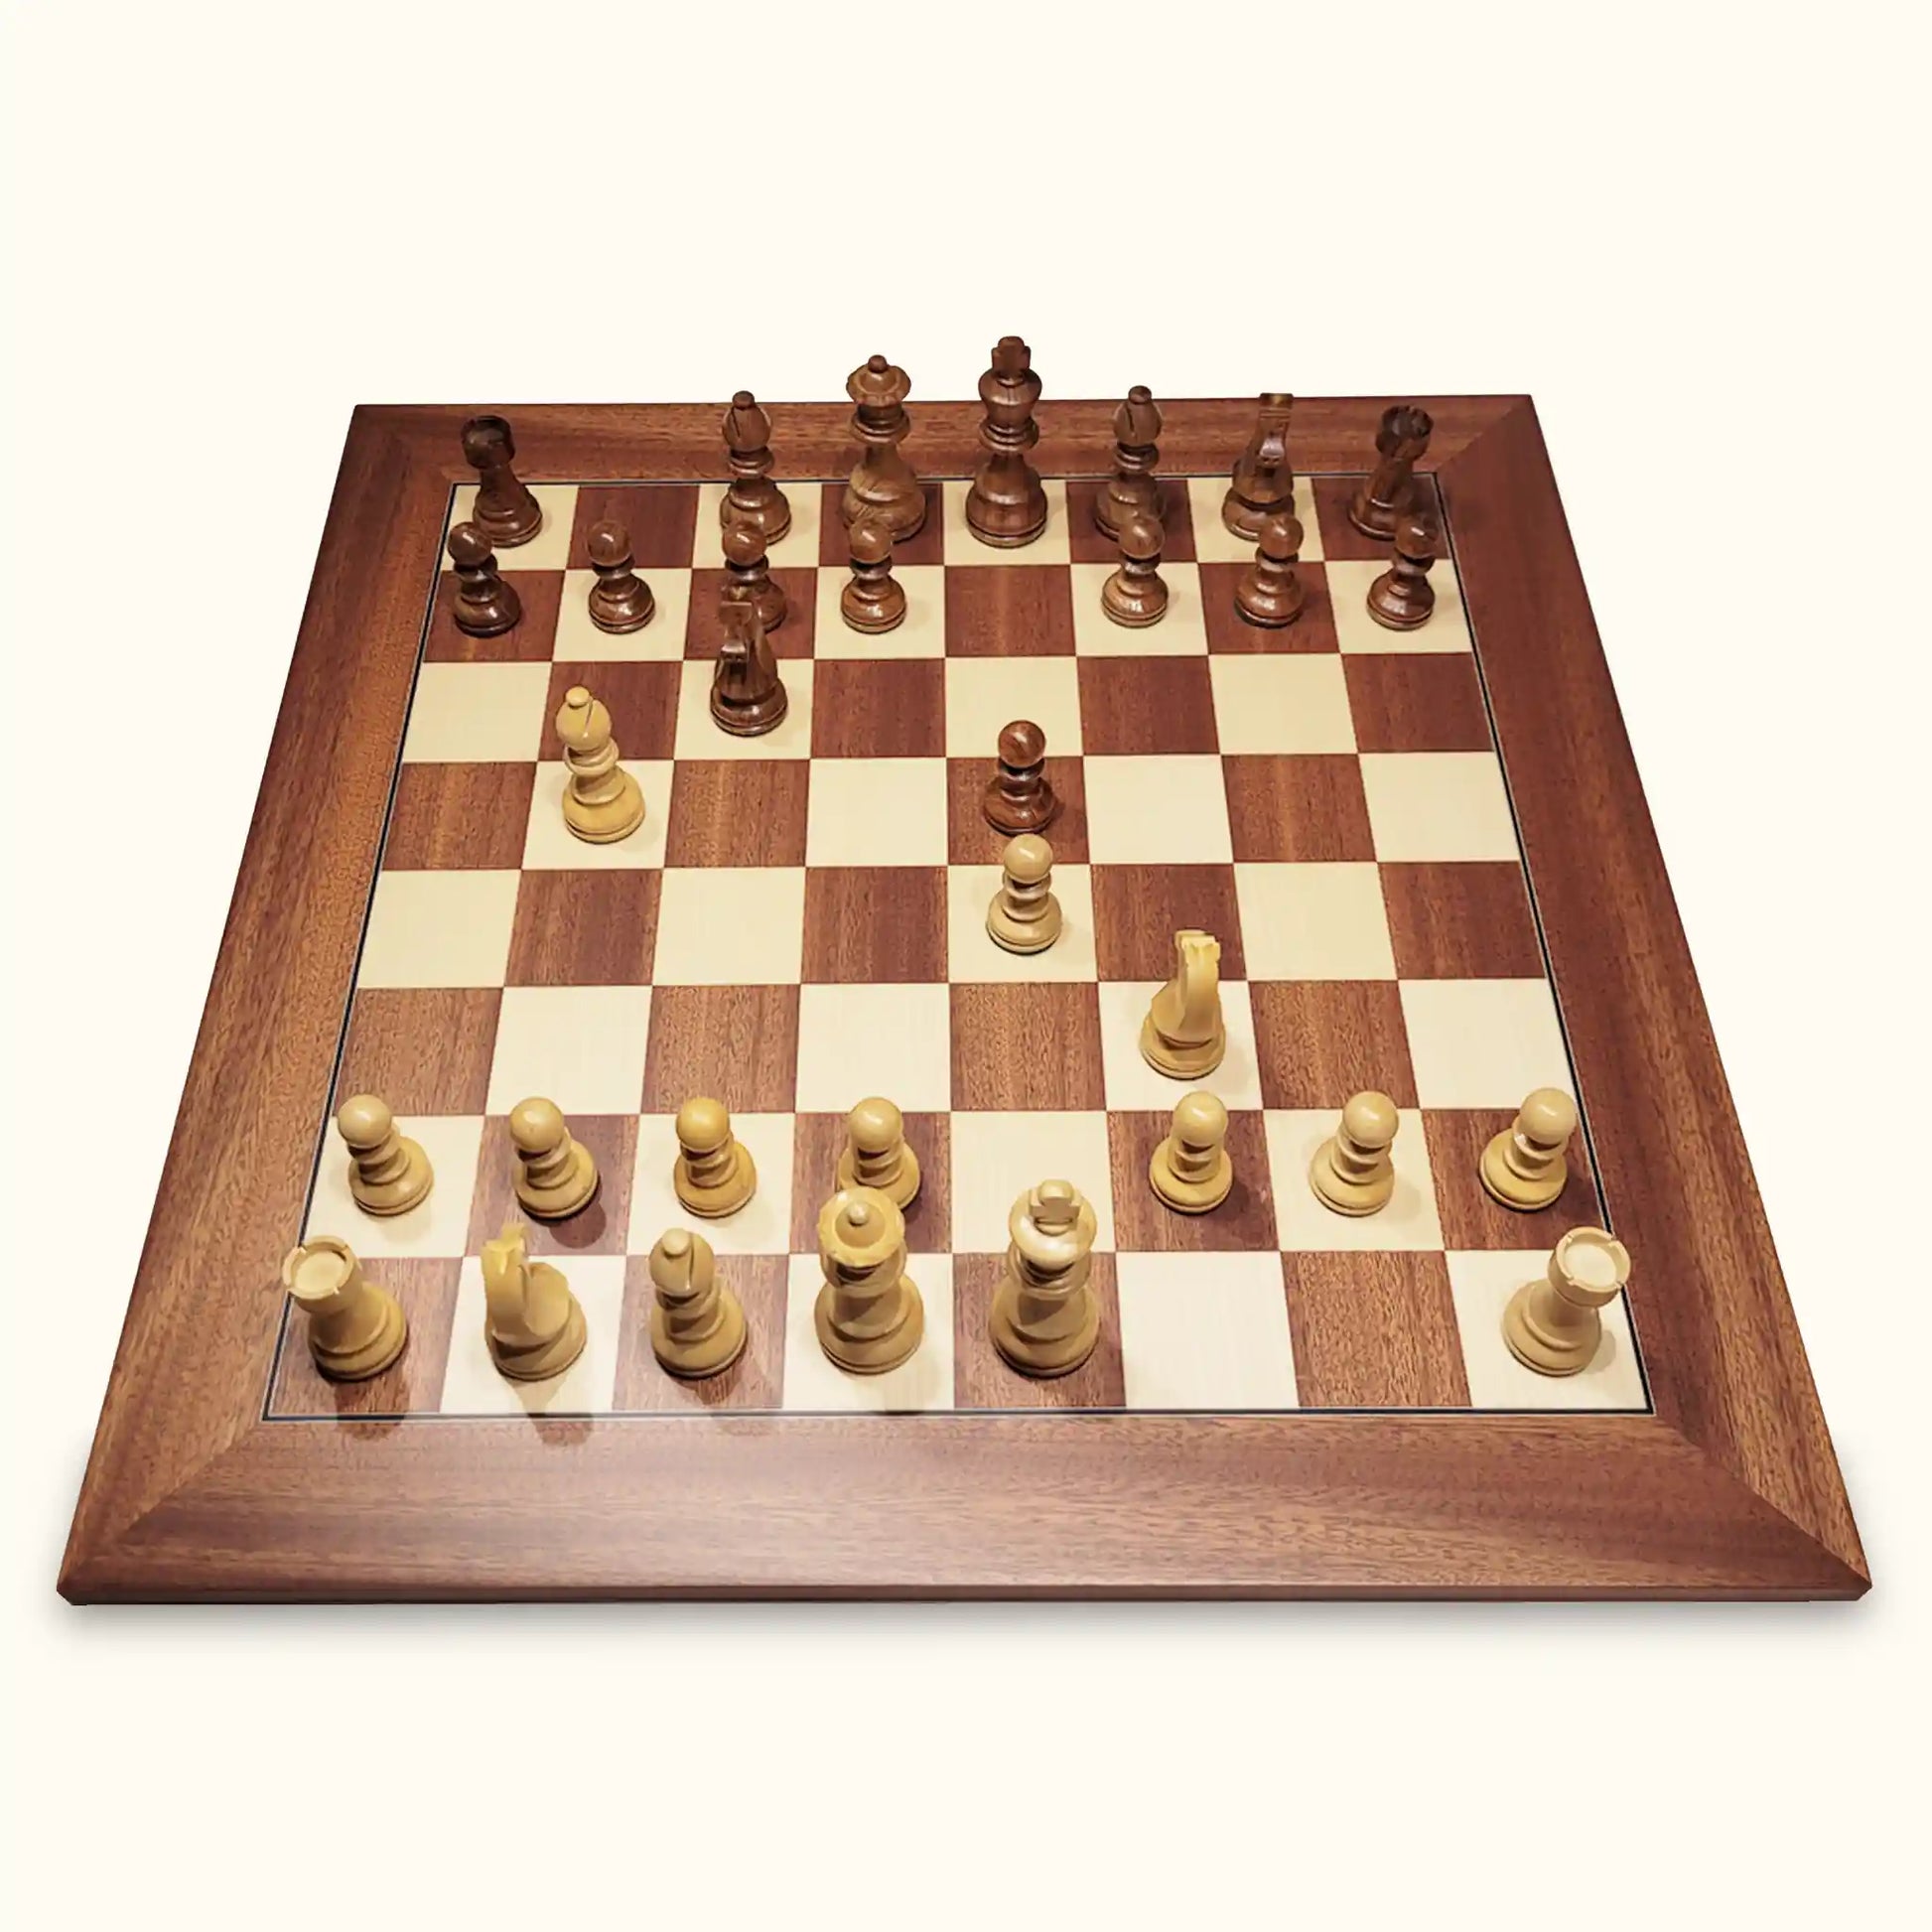 Chessboard mahogany deluxe with chess pieces german knight top